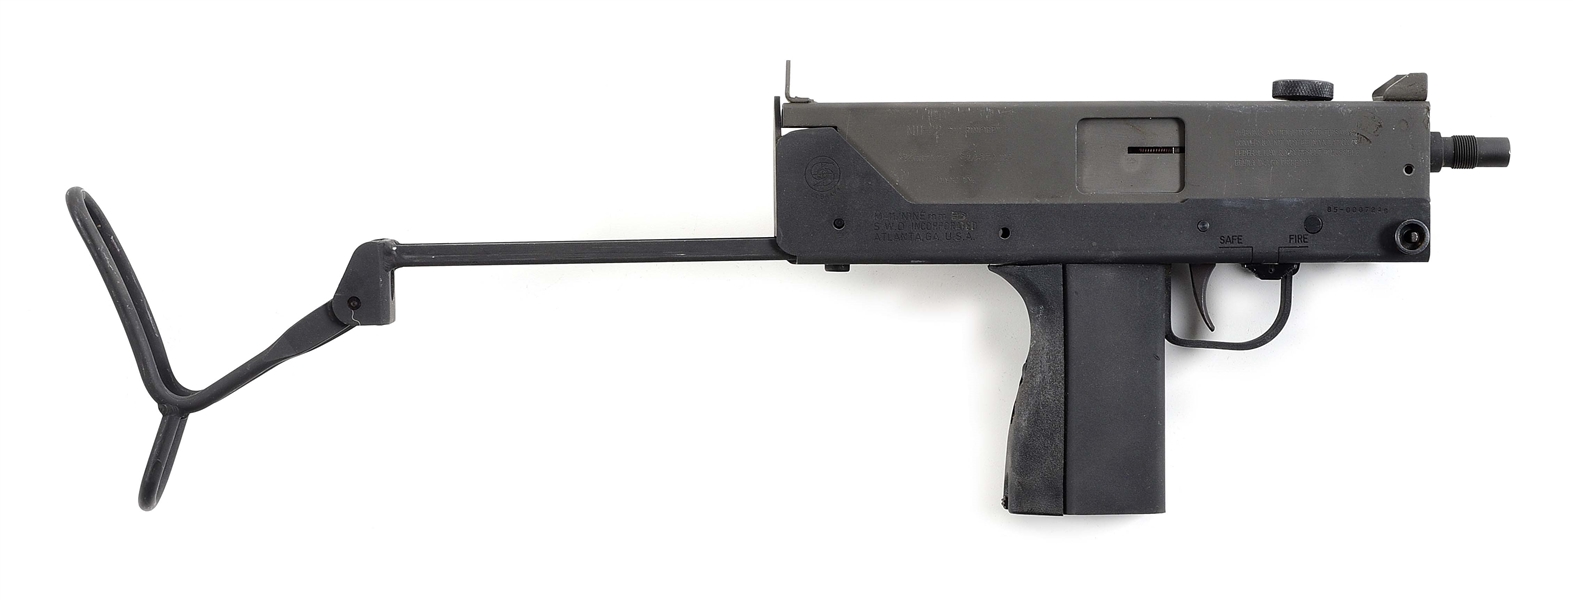 (N) S.W.D. M-11/NINE MACHINE GUN WITH FLEMING FIREARMS M11-22 CONVERSION KIT & ACCESSORIES (FULLY TRANSFERABLE).